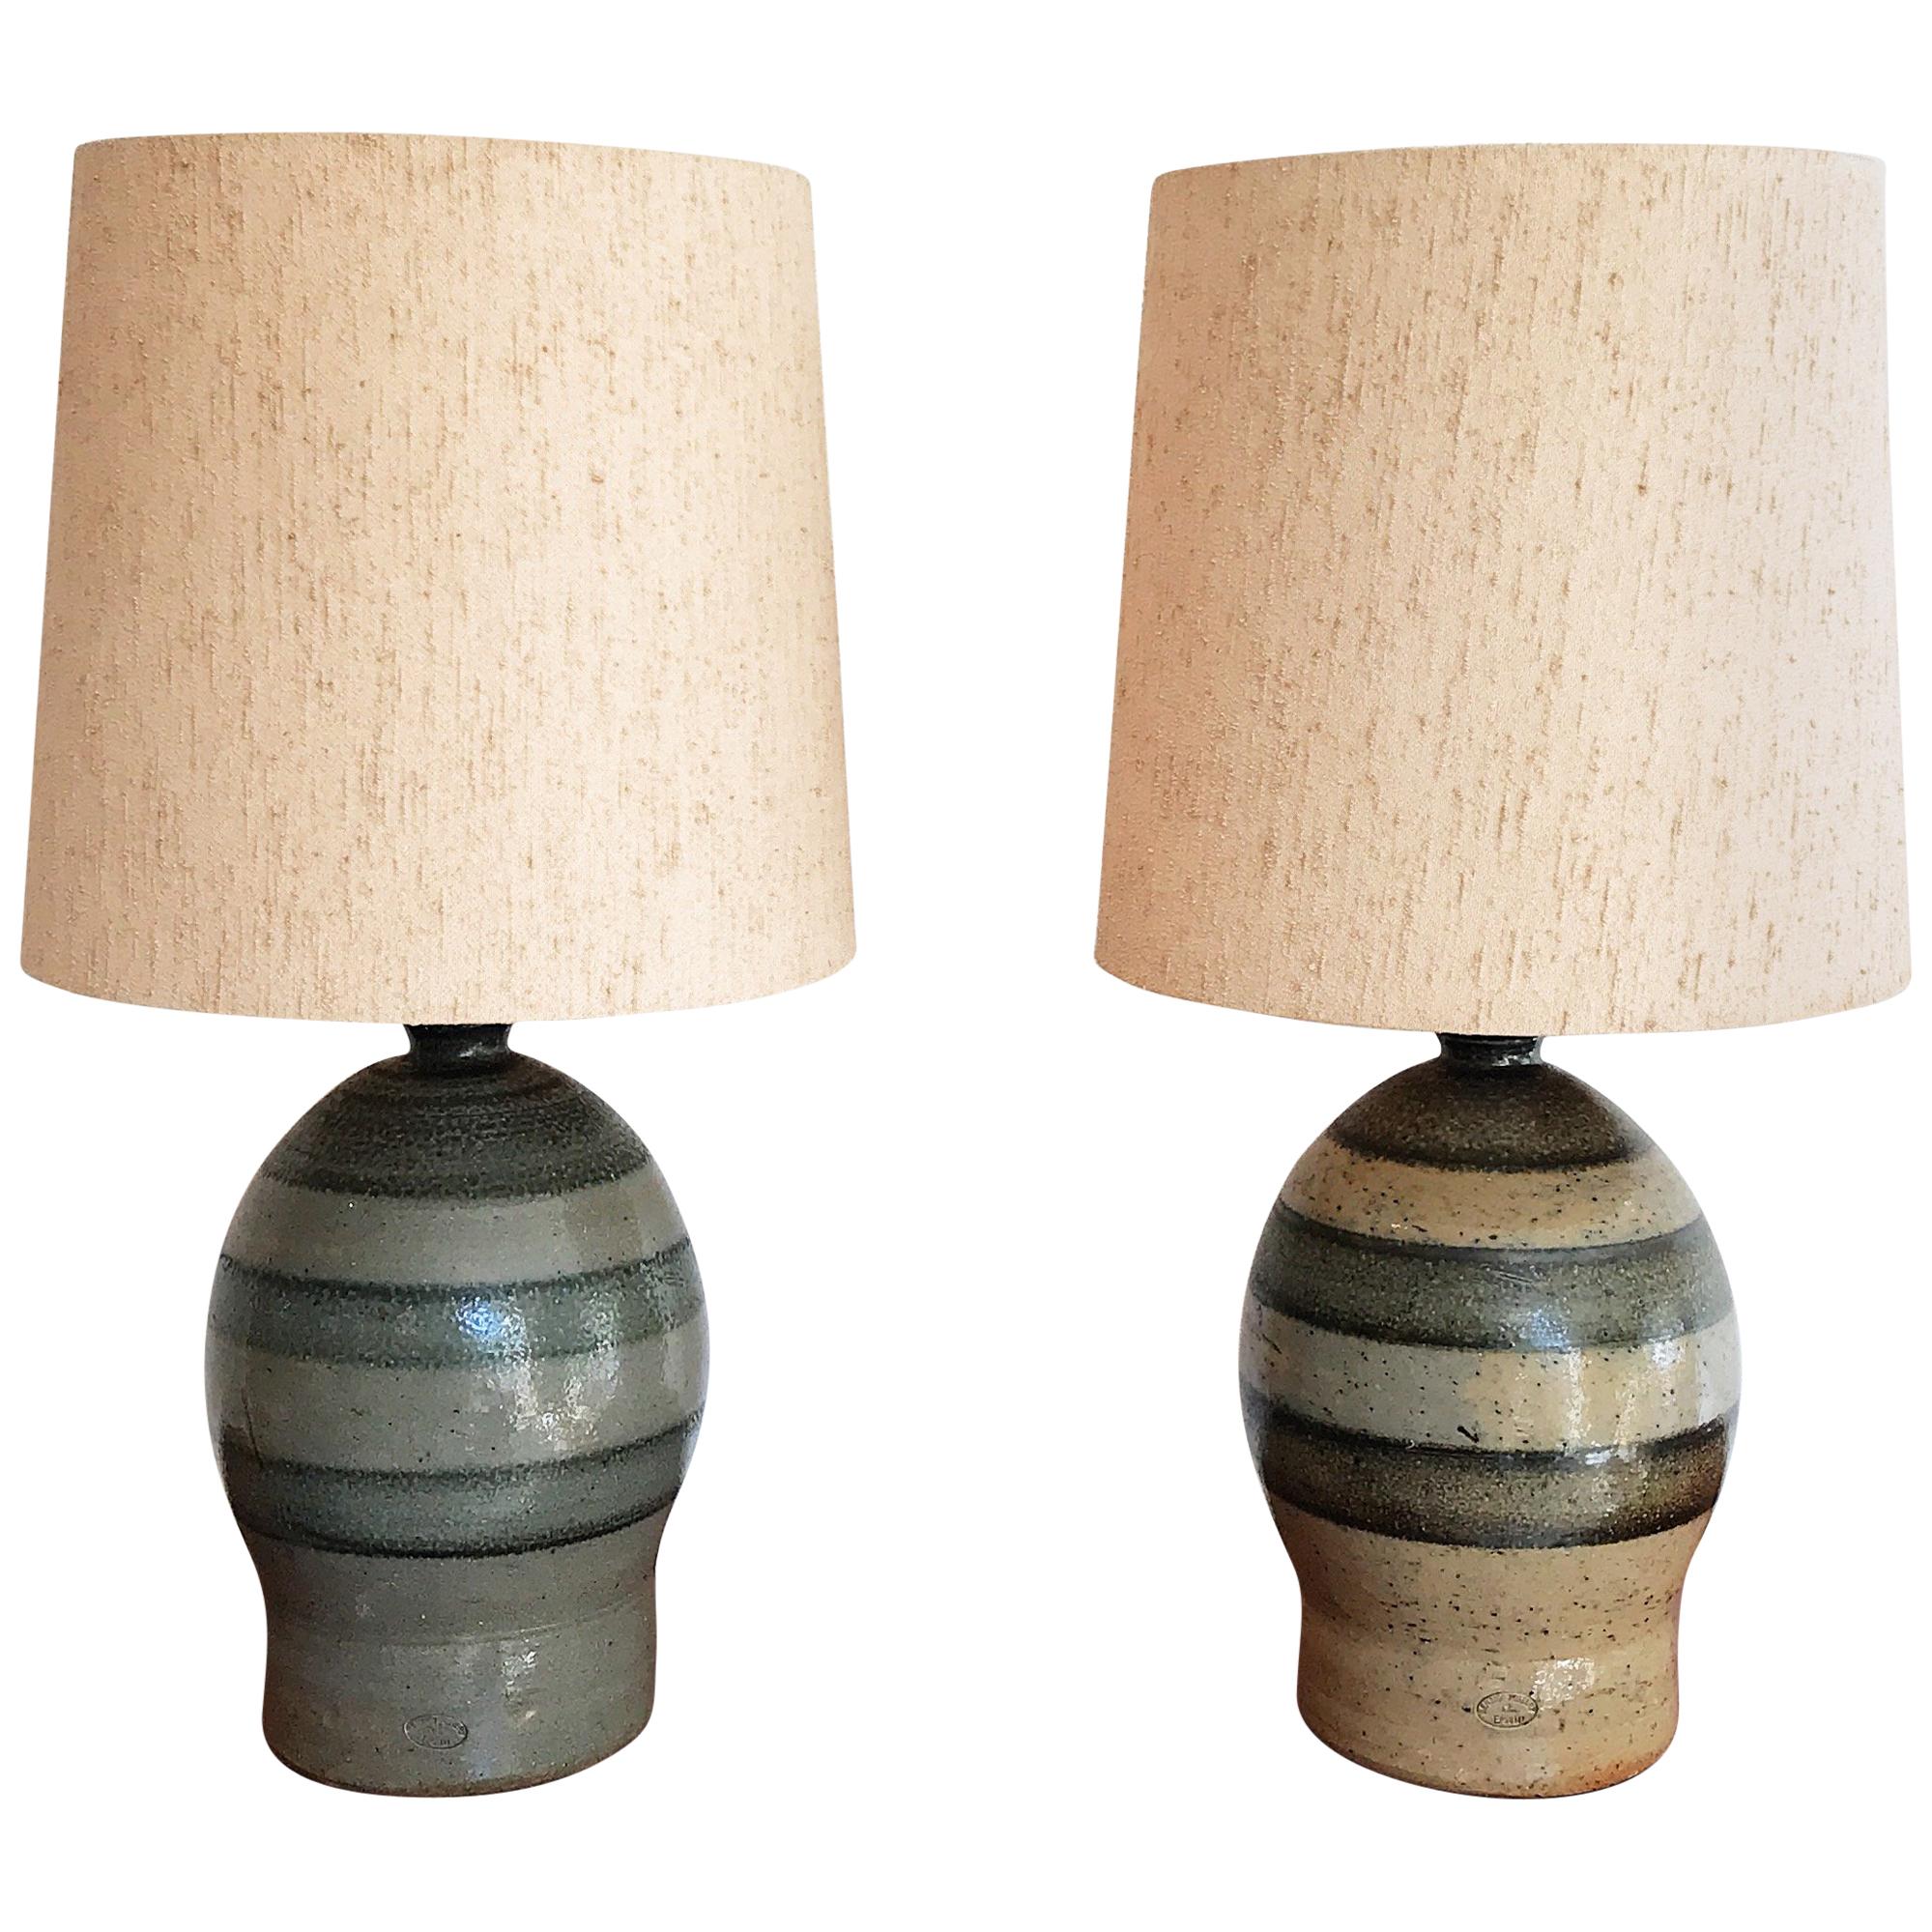 Pair of Mid-20th Century Bendigo Pottery Table Lamps with Period Textured Shades